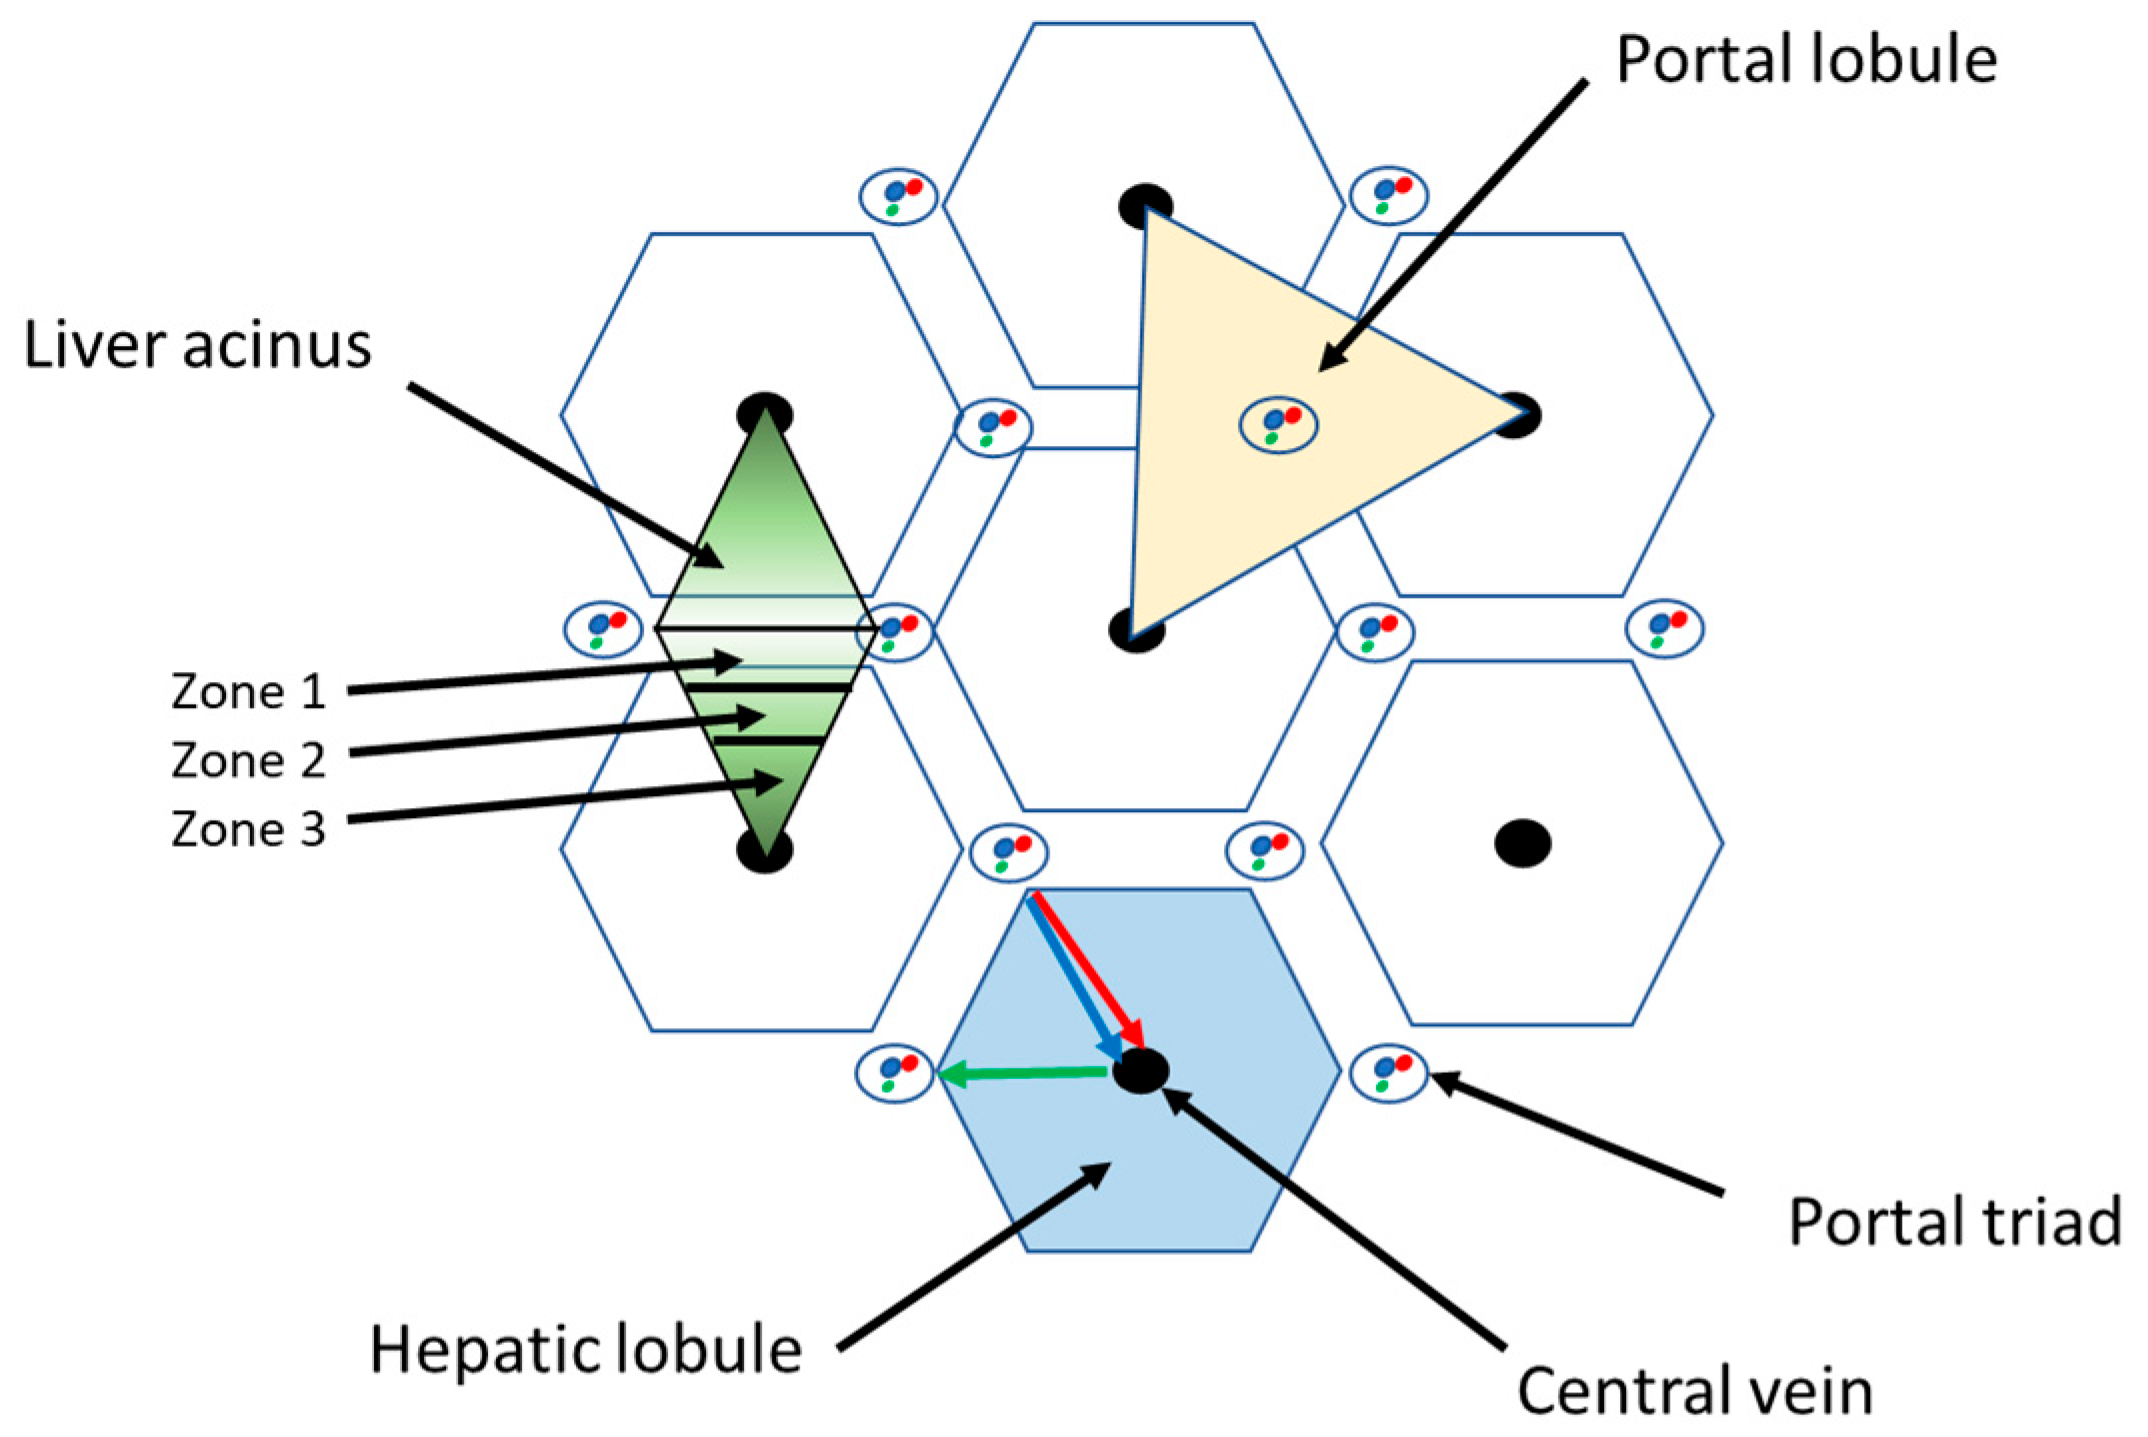 The structure of the hepatic lobule